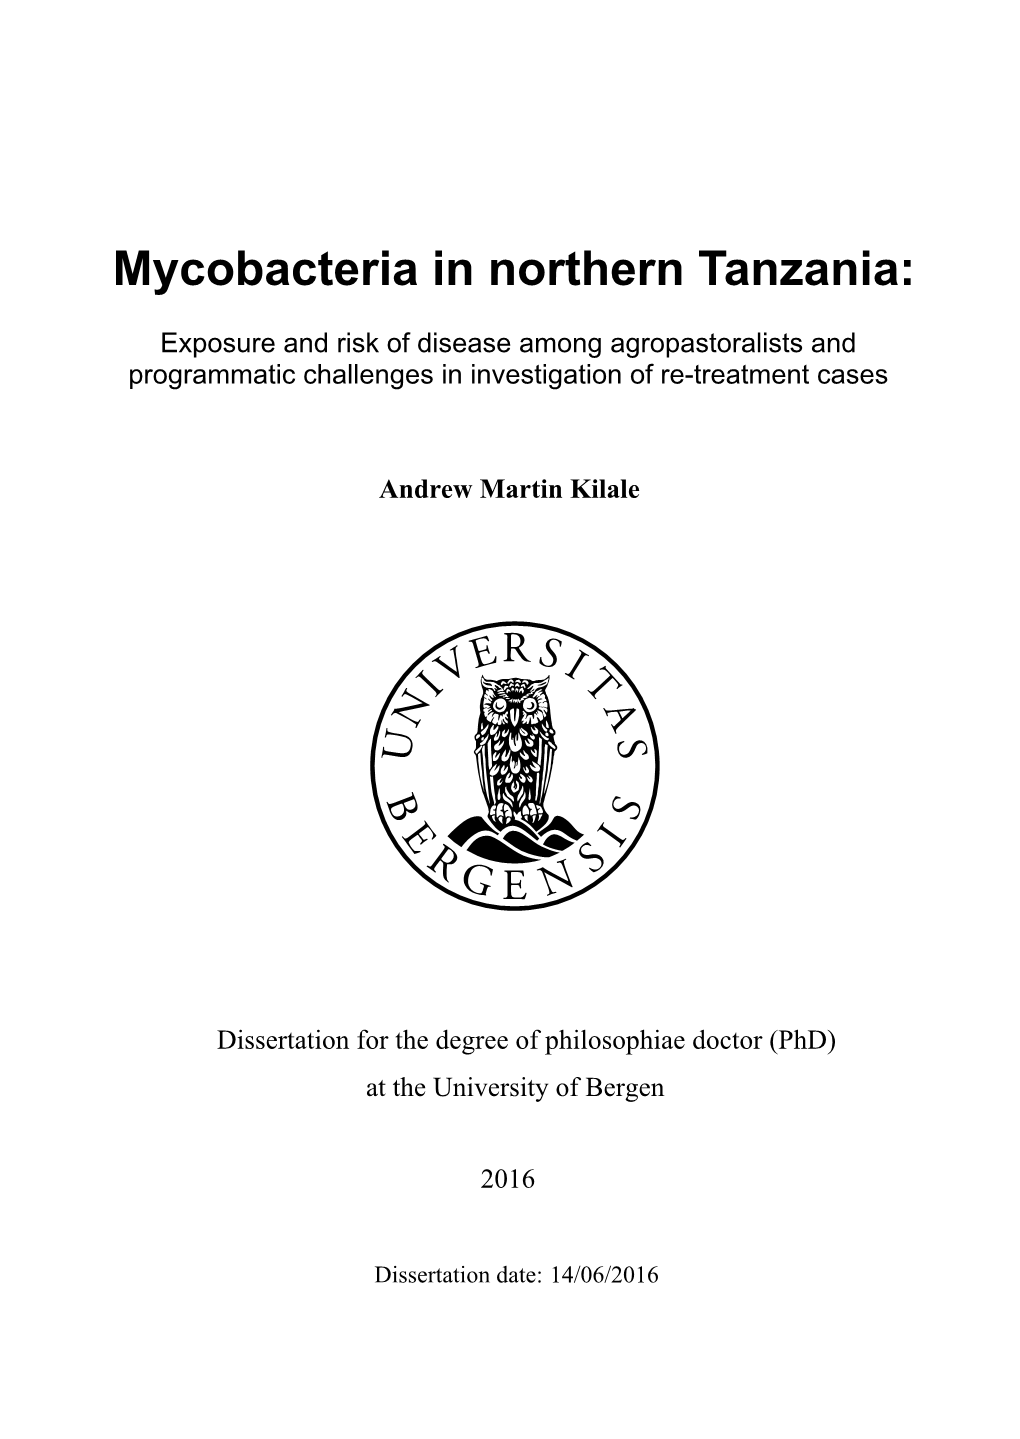 Mycobacteria in Northern Tanzania: Exposure and Risk of Disease Among Agropastoralists and Programmatic Challenges in Investigation of Re-Treatment Cases